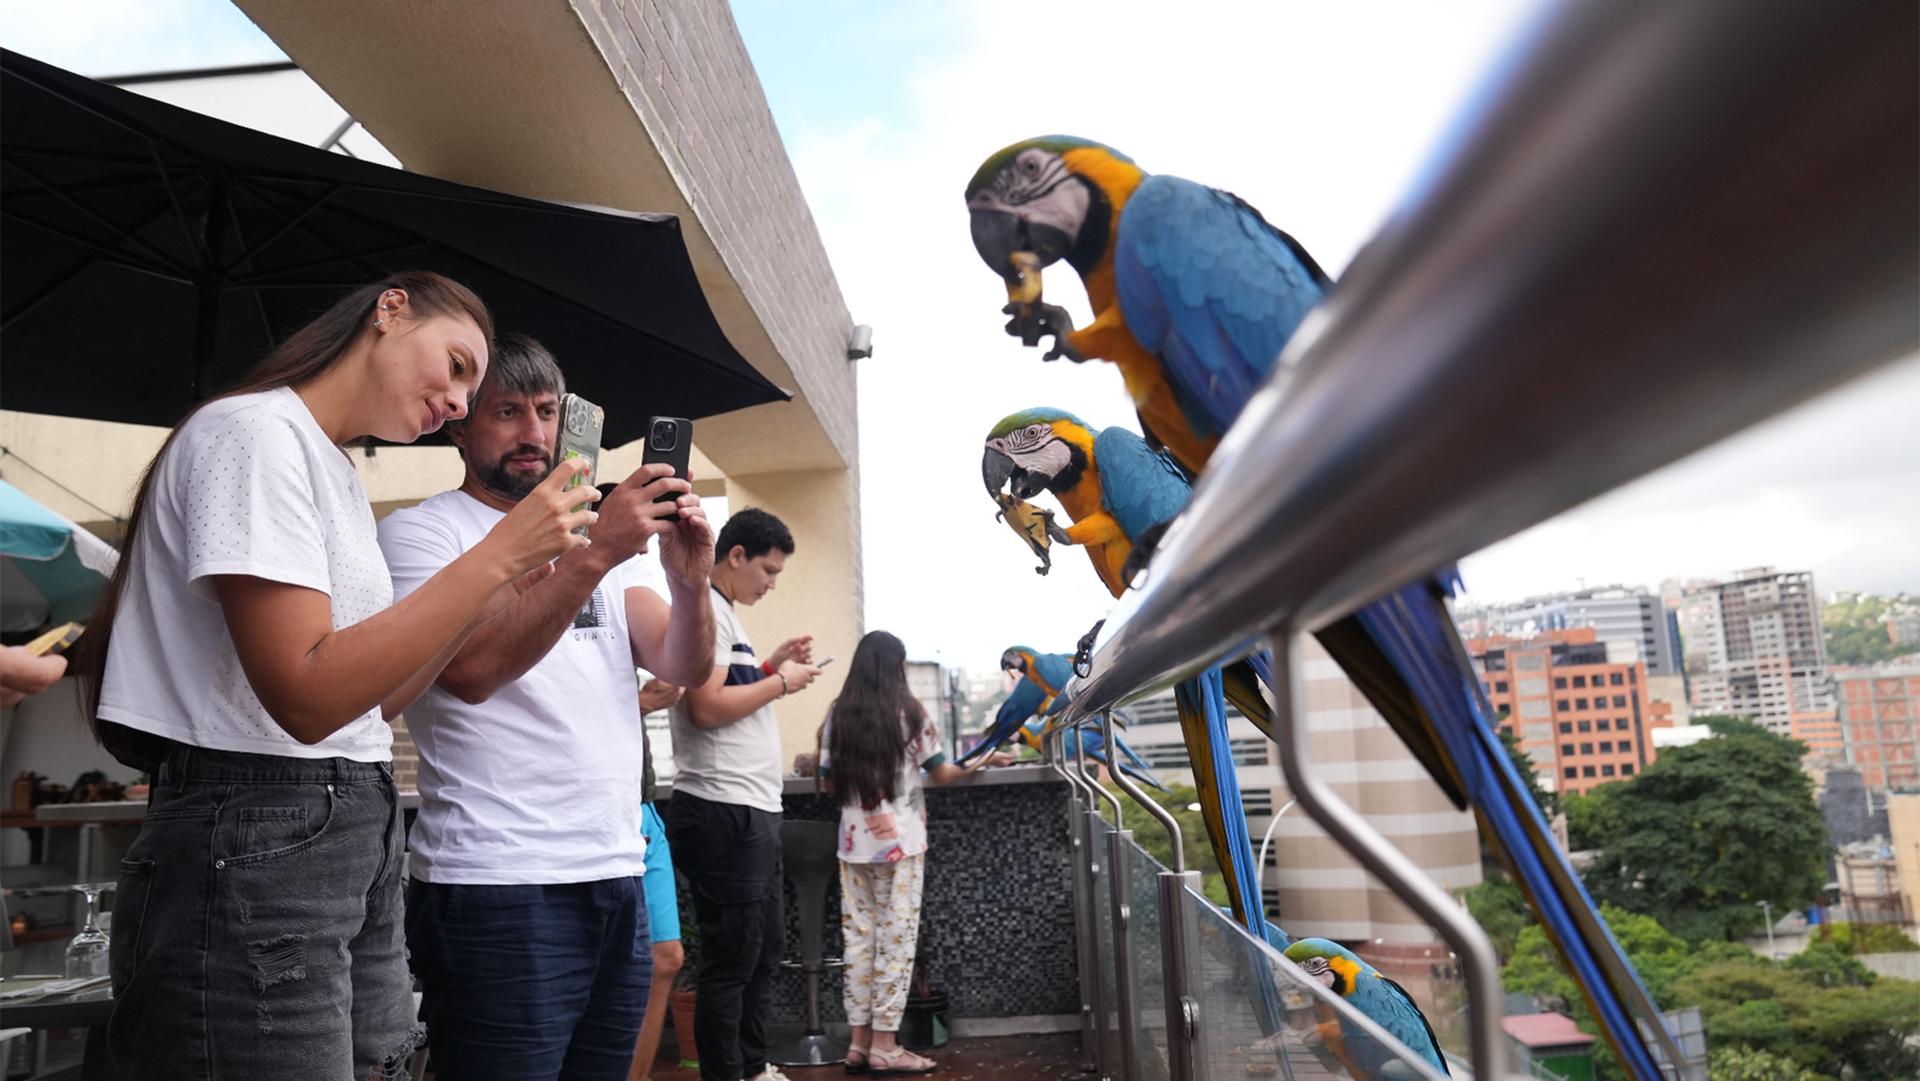 a group of tourists take photos of the birds perched on the balcony rails